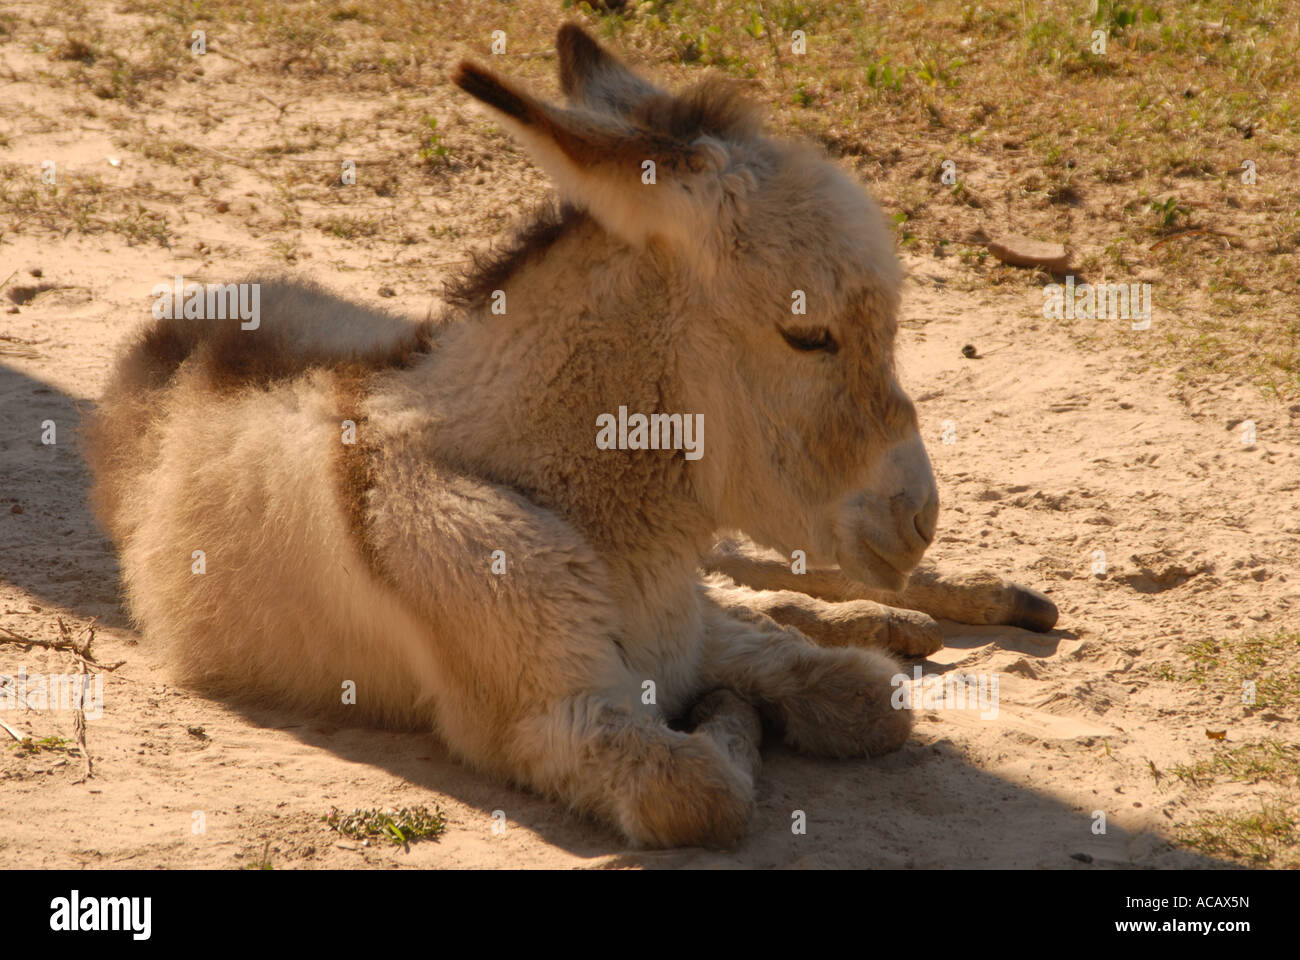 Donkey resting in the shade, Paraguay Stock Photo